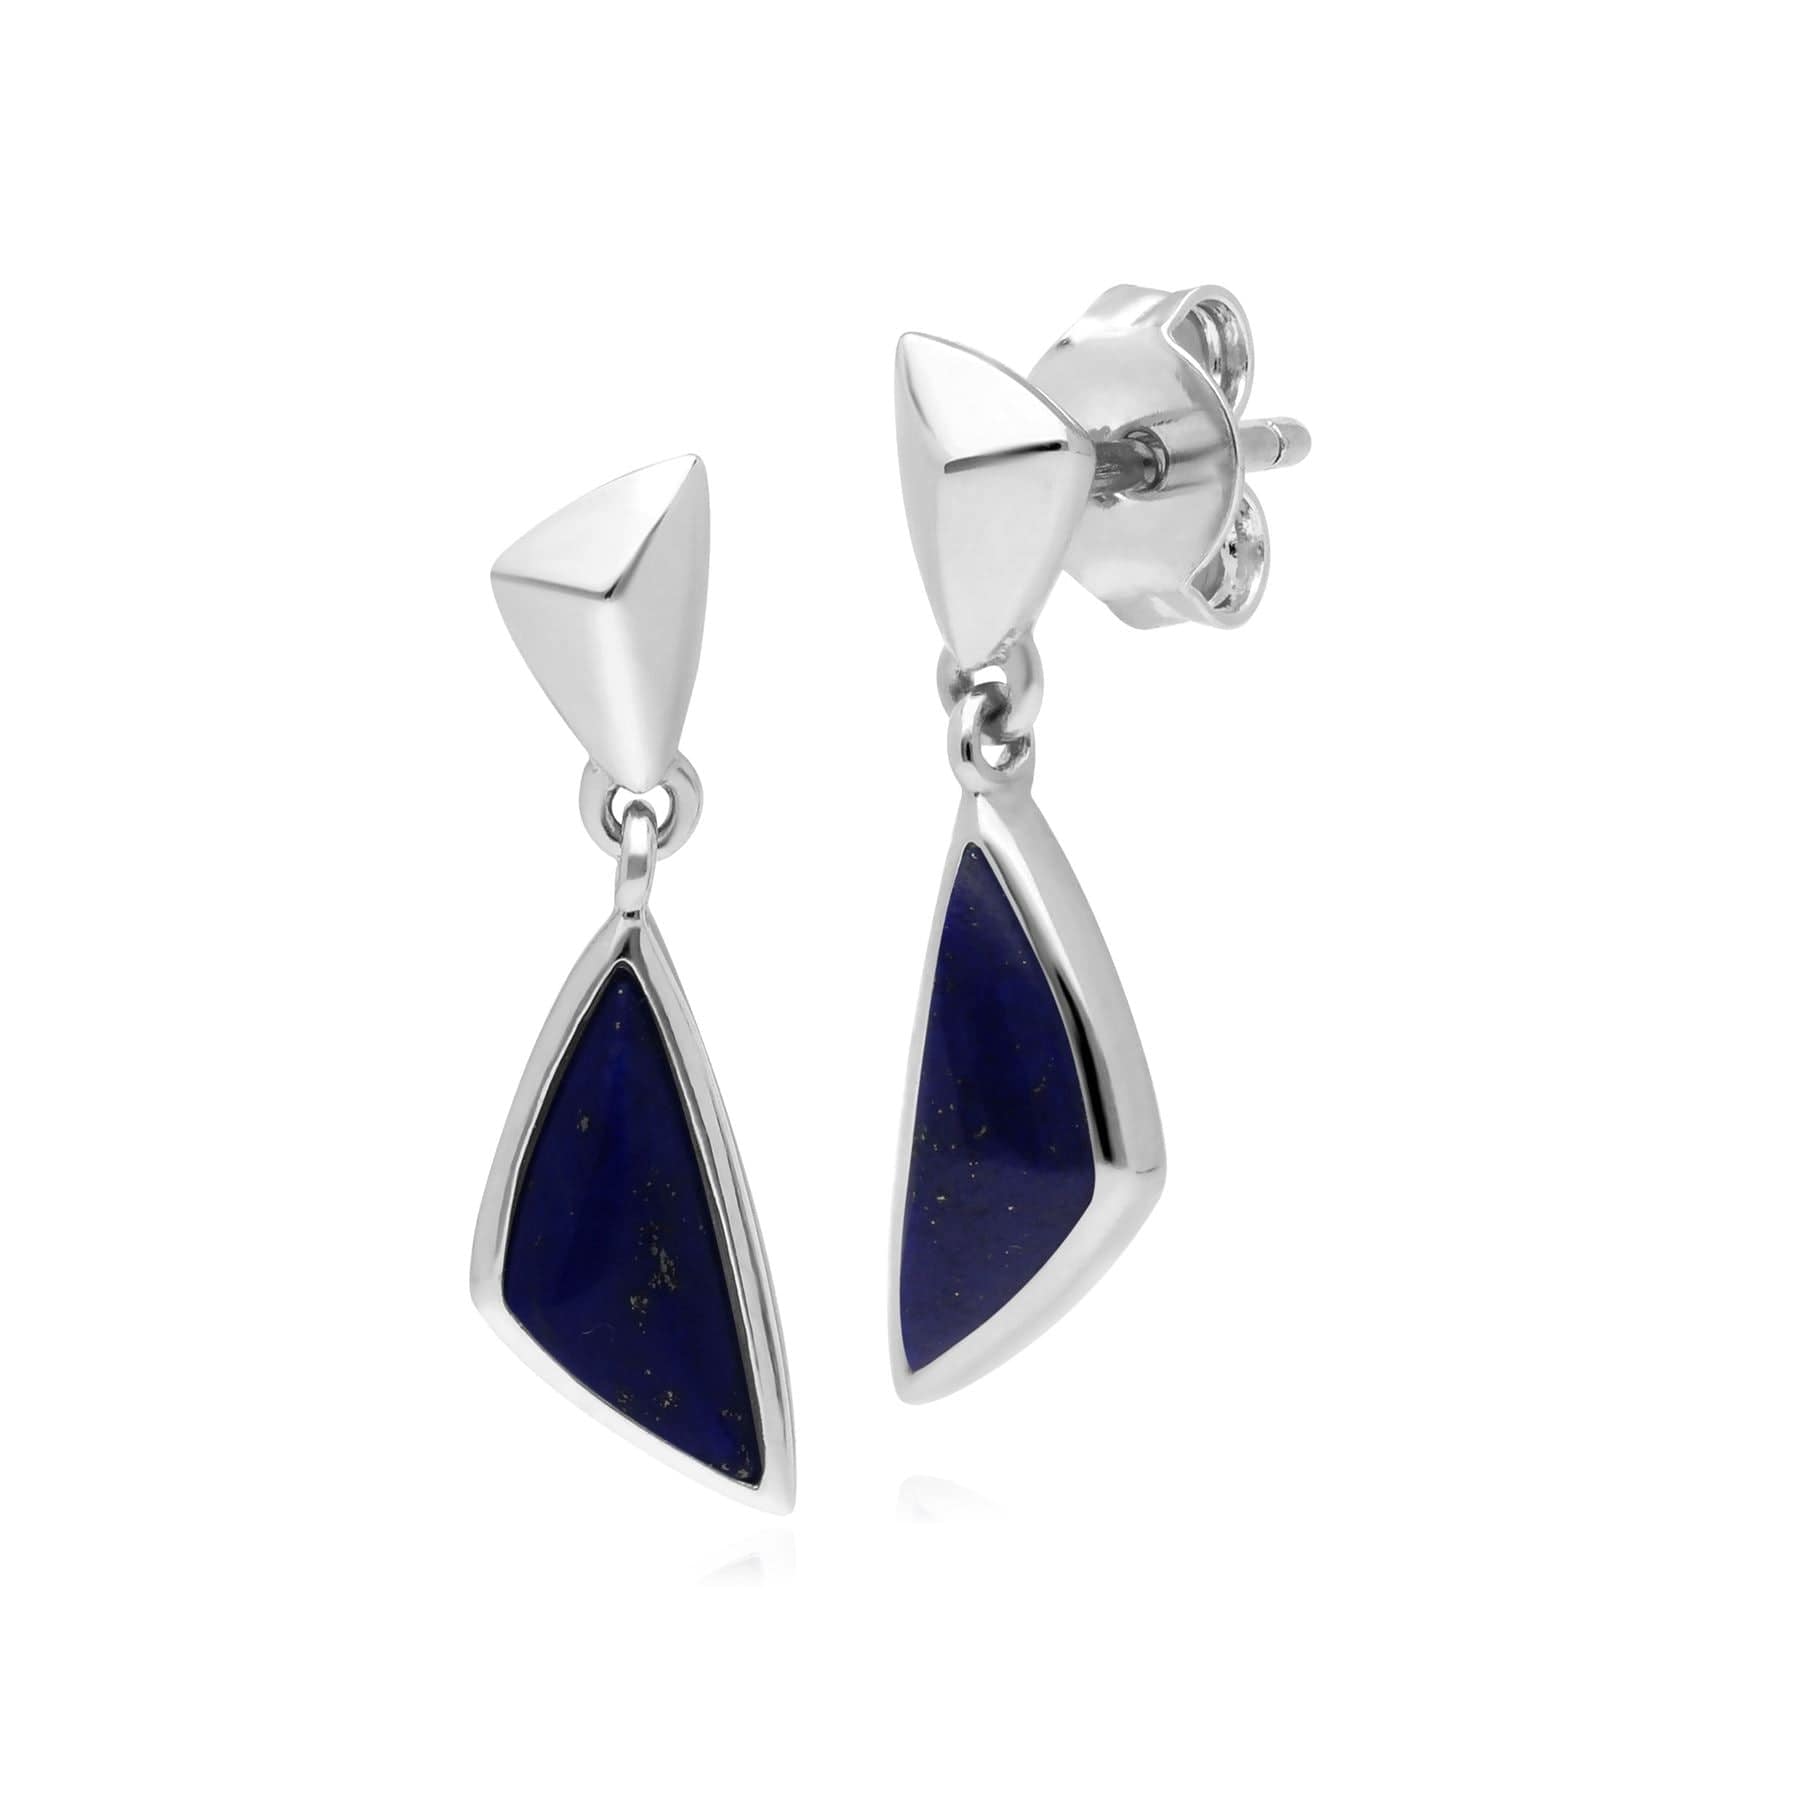 Photos - Earrings Micro Statement Lapis Lazuli Drop  in Sterling Silver